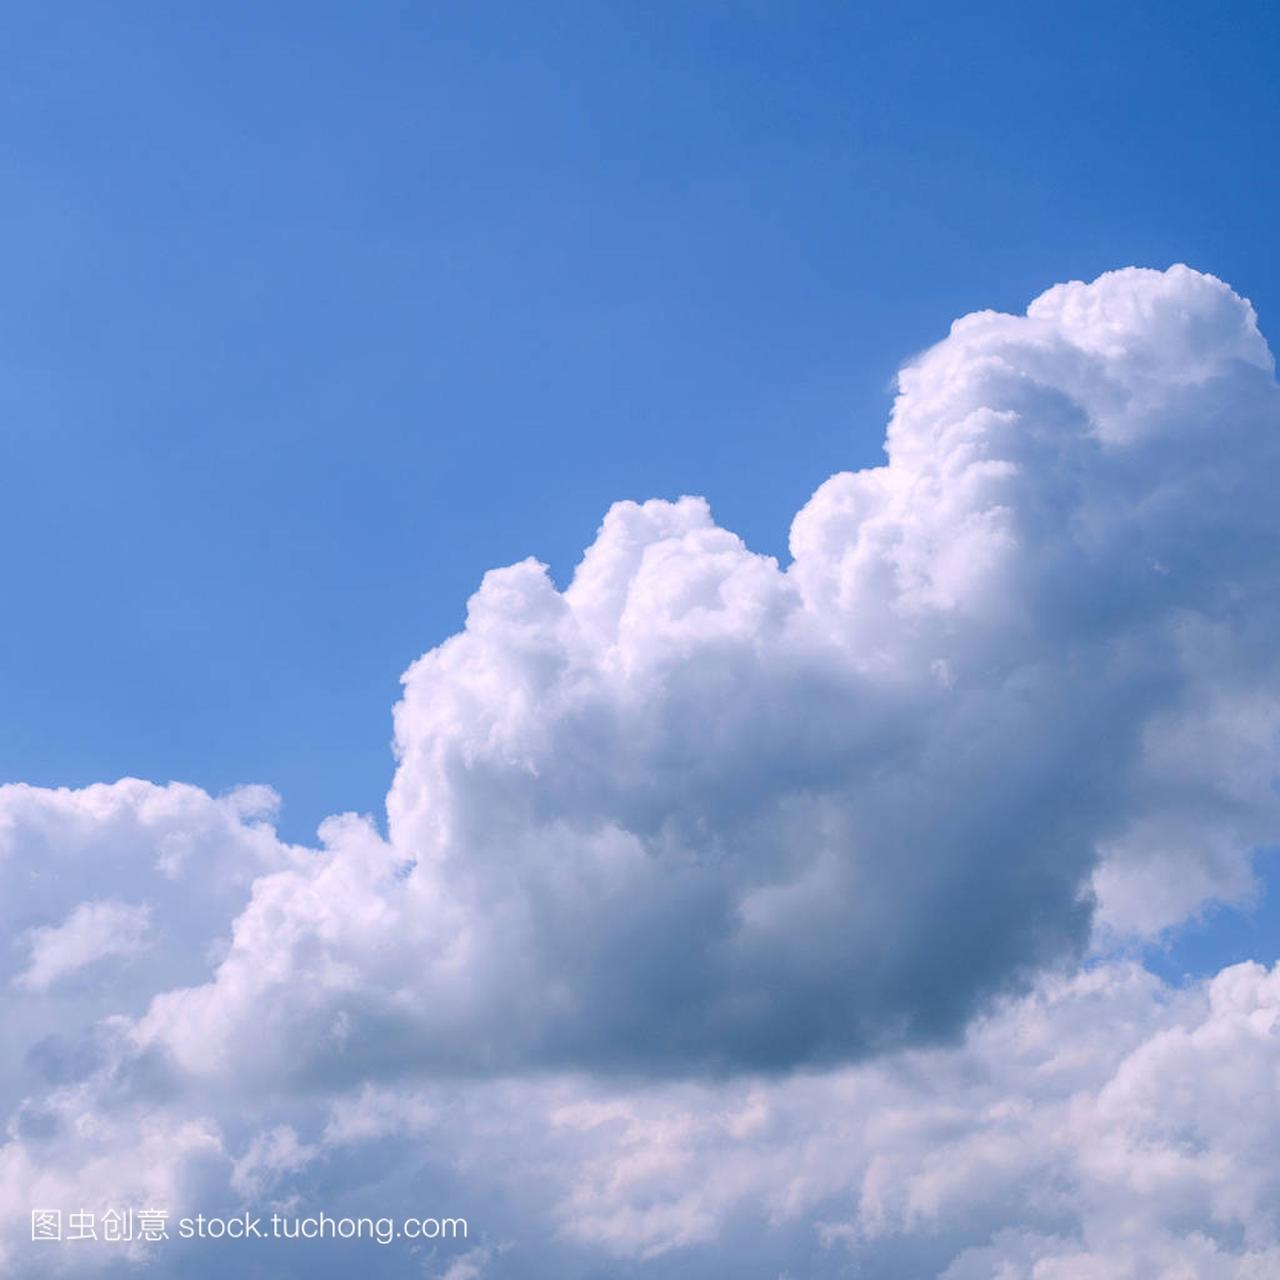 White fluffy clouds in the vast blue sky. Abstract